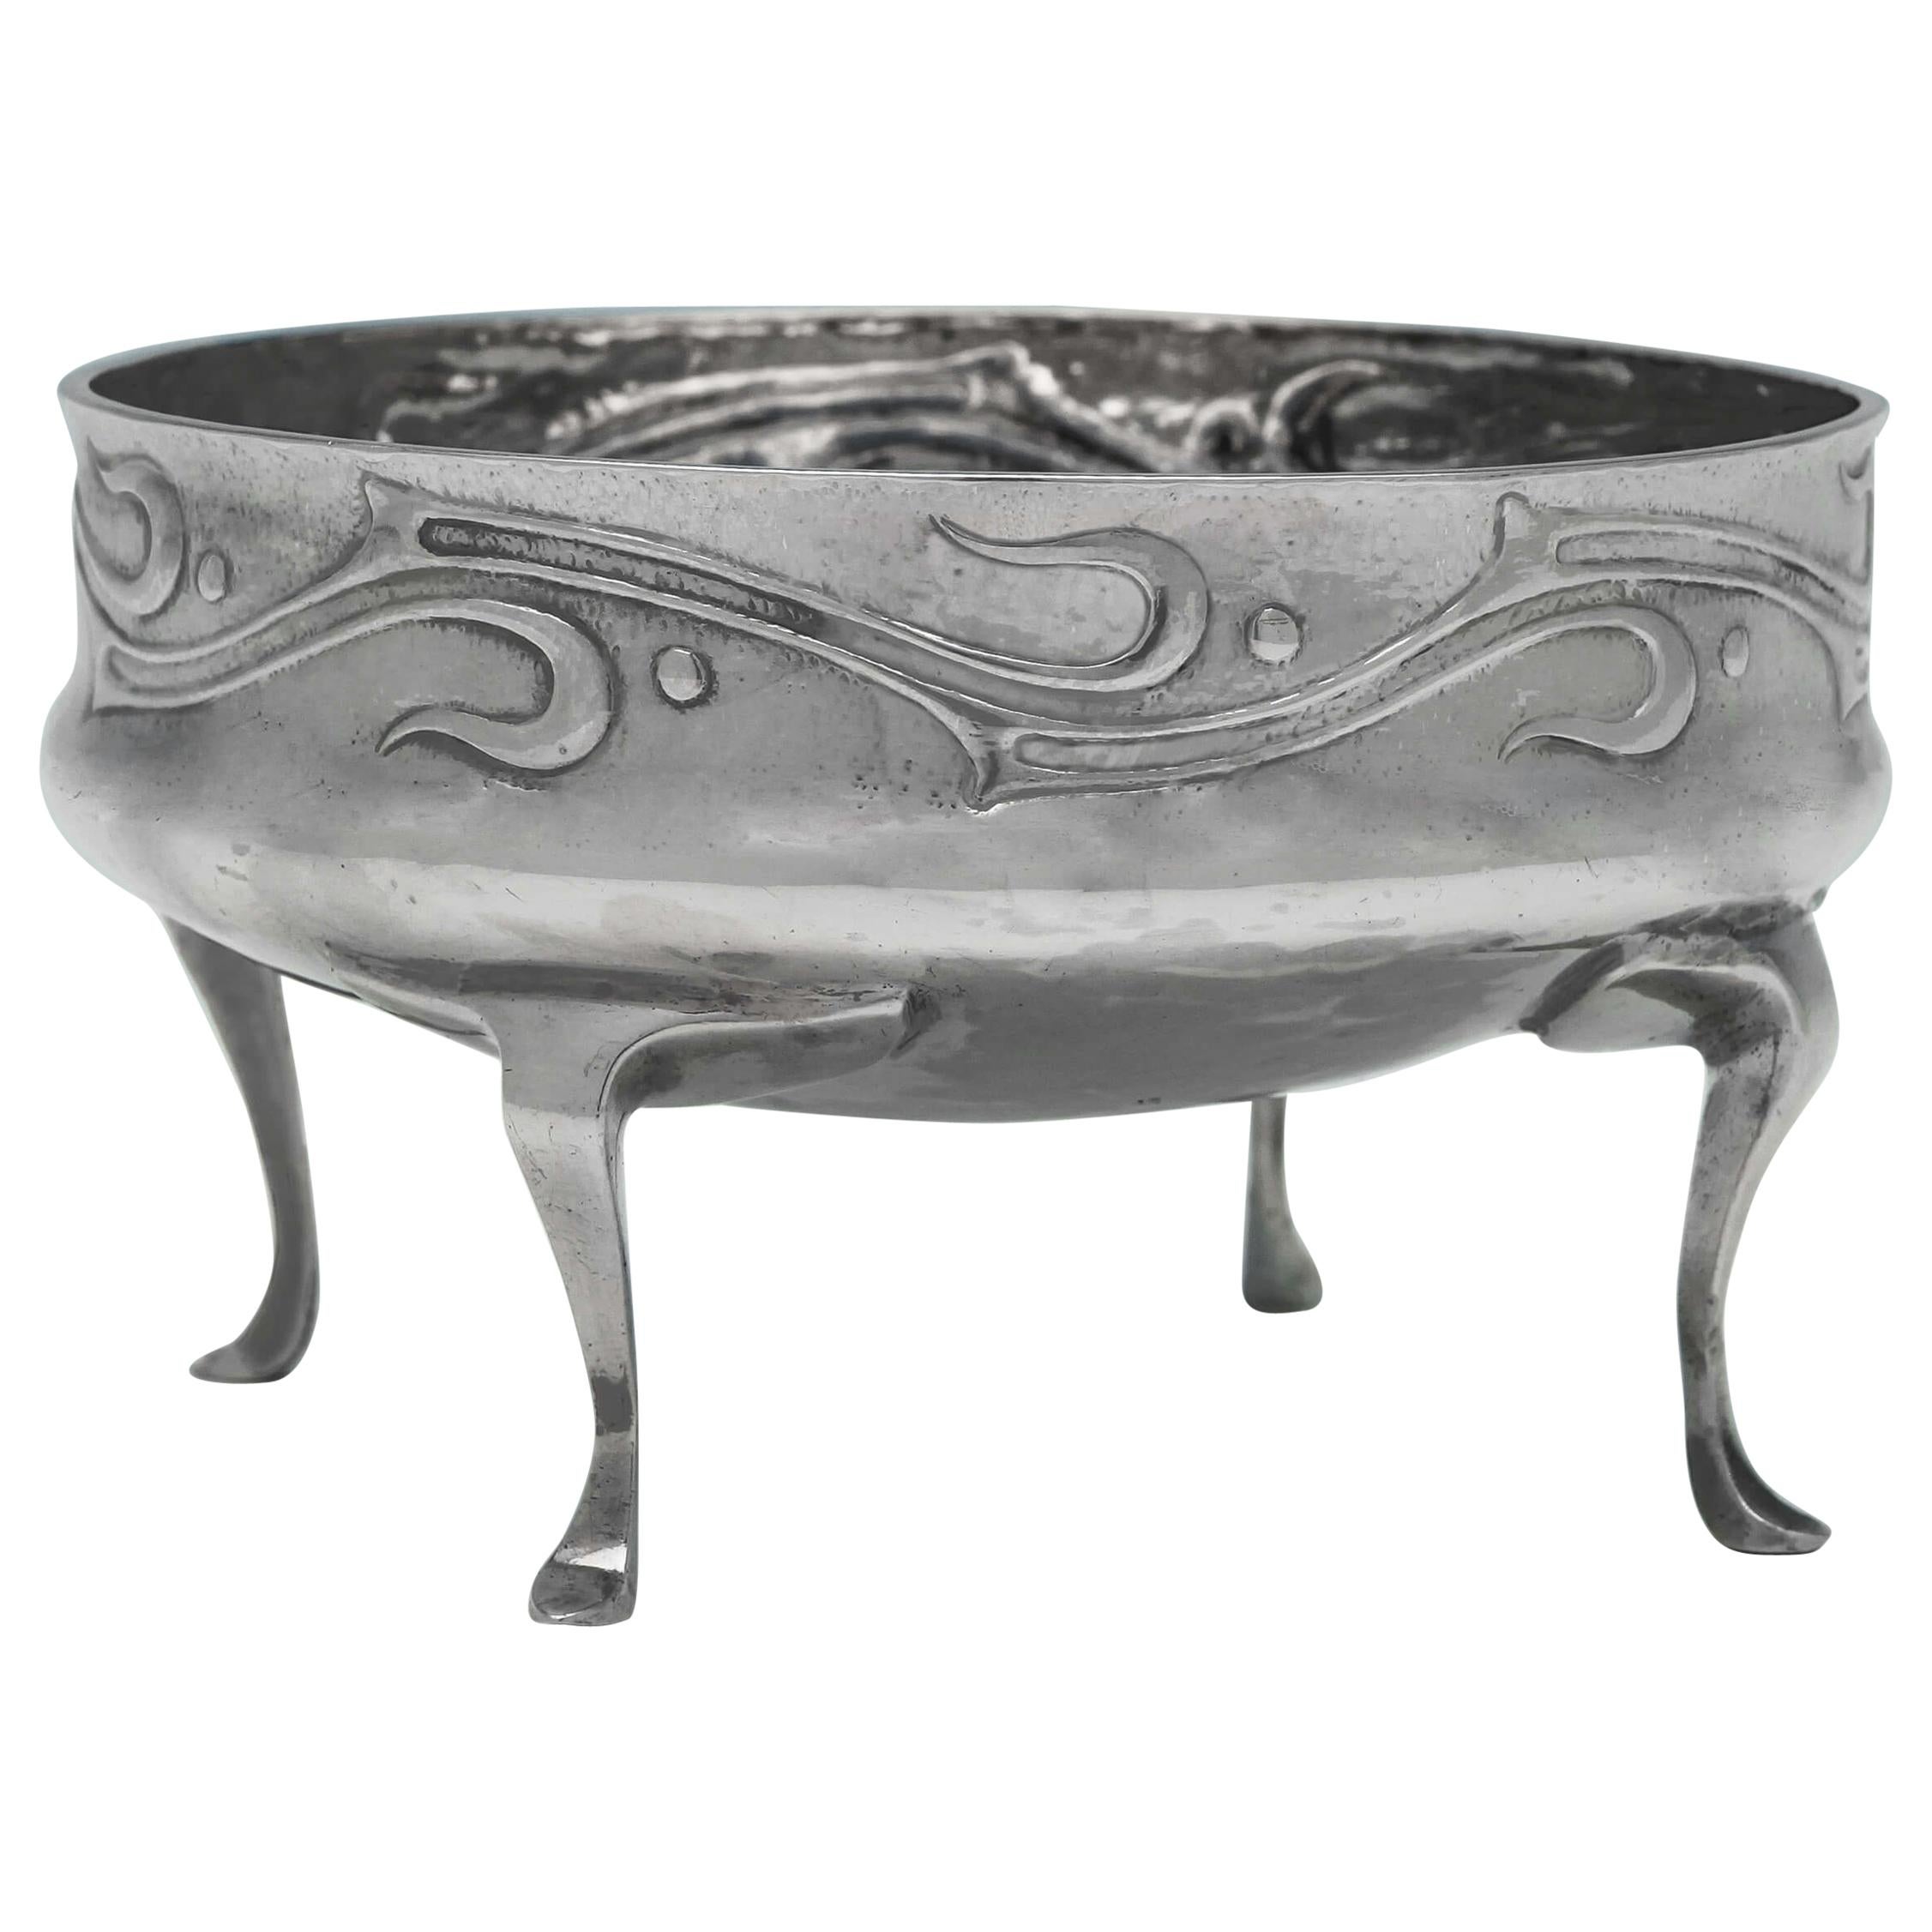 Archibald Knox Design for Liberty & Co - Sterling Silver Cymric Bowl - 1900 For Sale